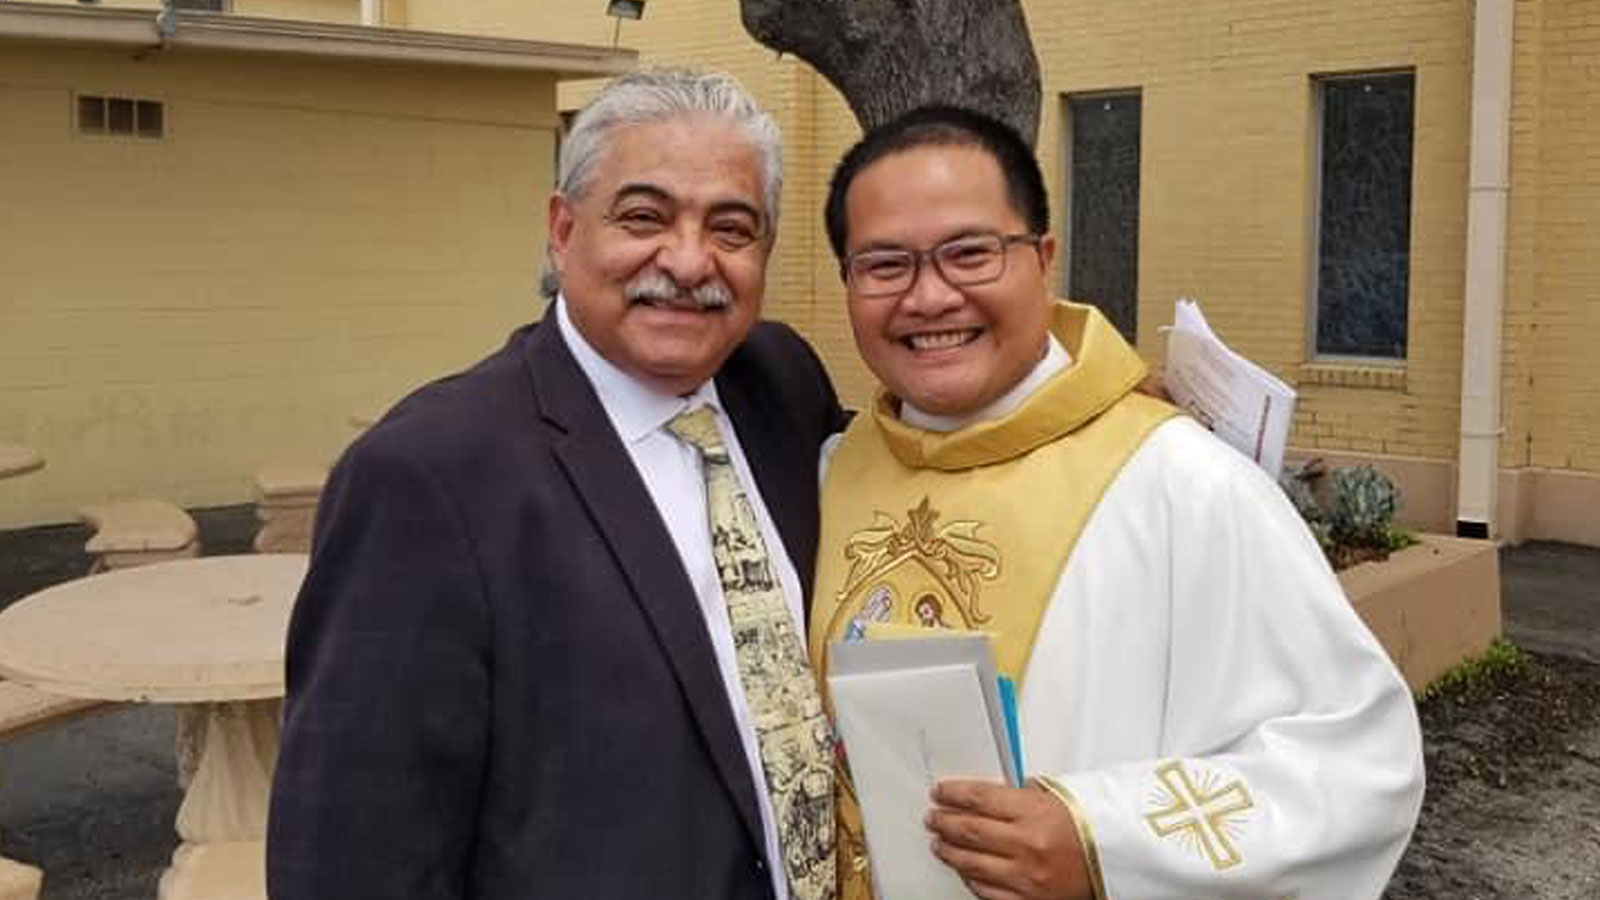 Roger Montecalvo (US) ordained a priest in Texas (USA)